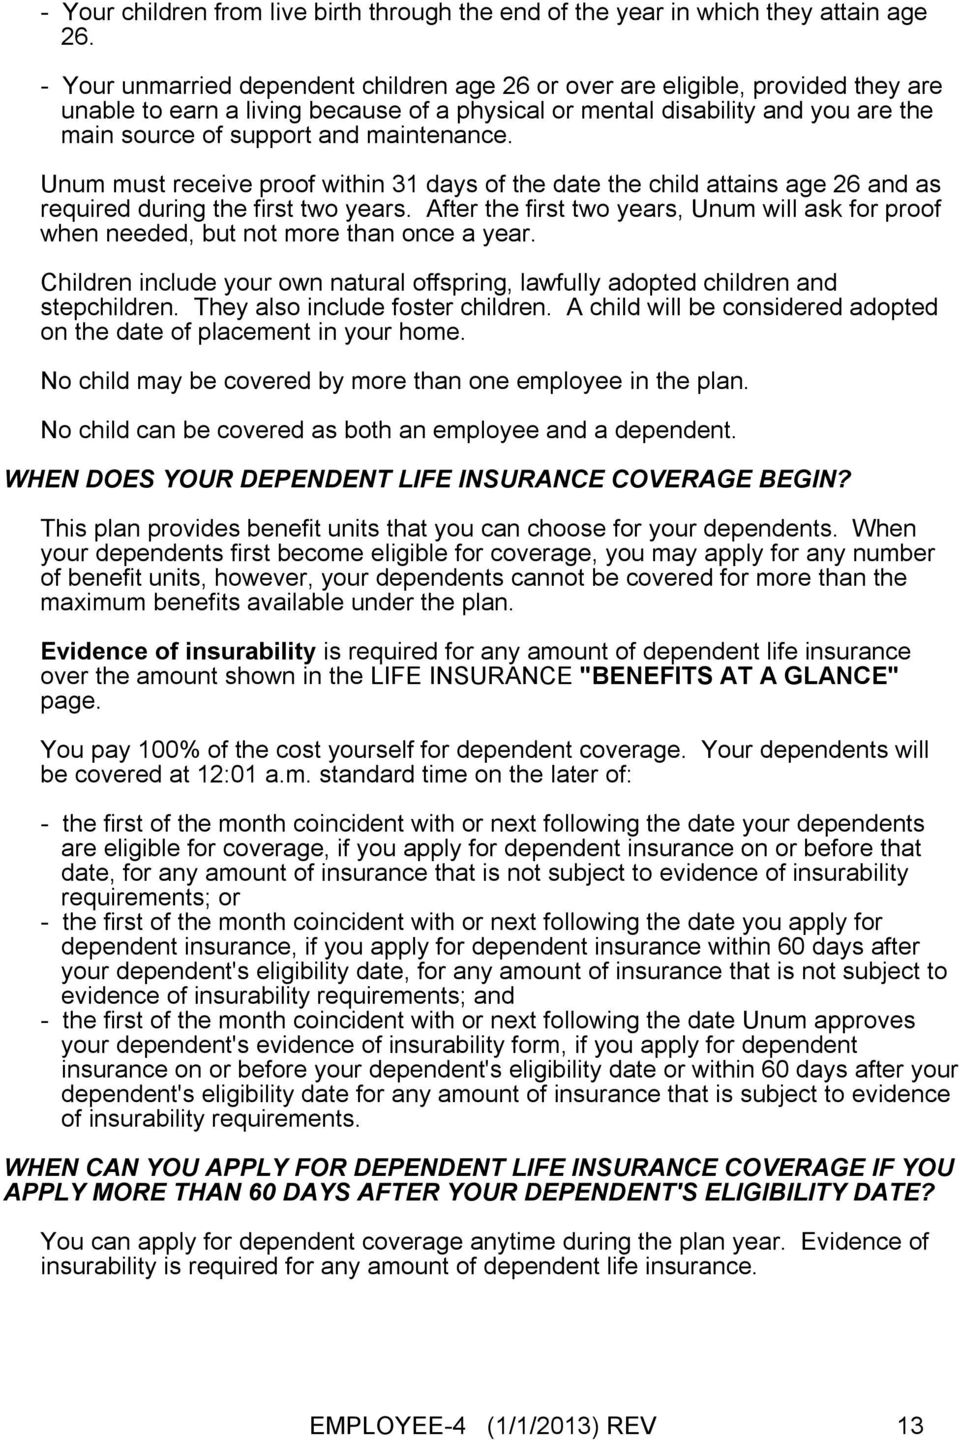 maintenance. Unum must receive proof within 31 days of the date the child attains age 26 and as required during the first two years.